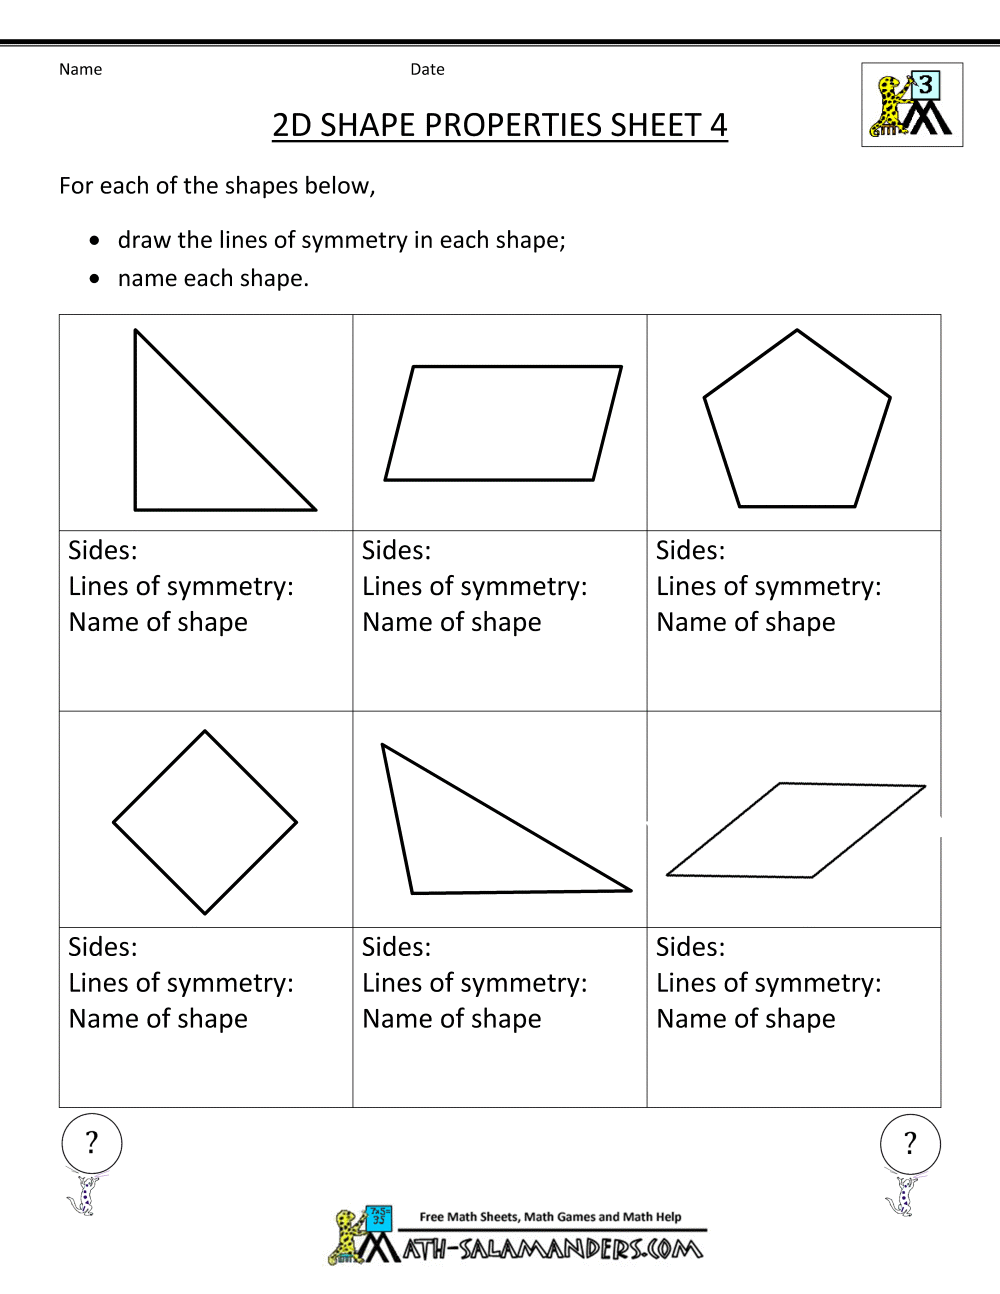 geometric shapes worksheets for 21nd grade Pertaining To 2nd Grade Geometry Worksheet